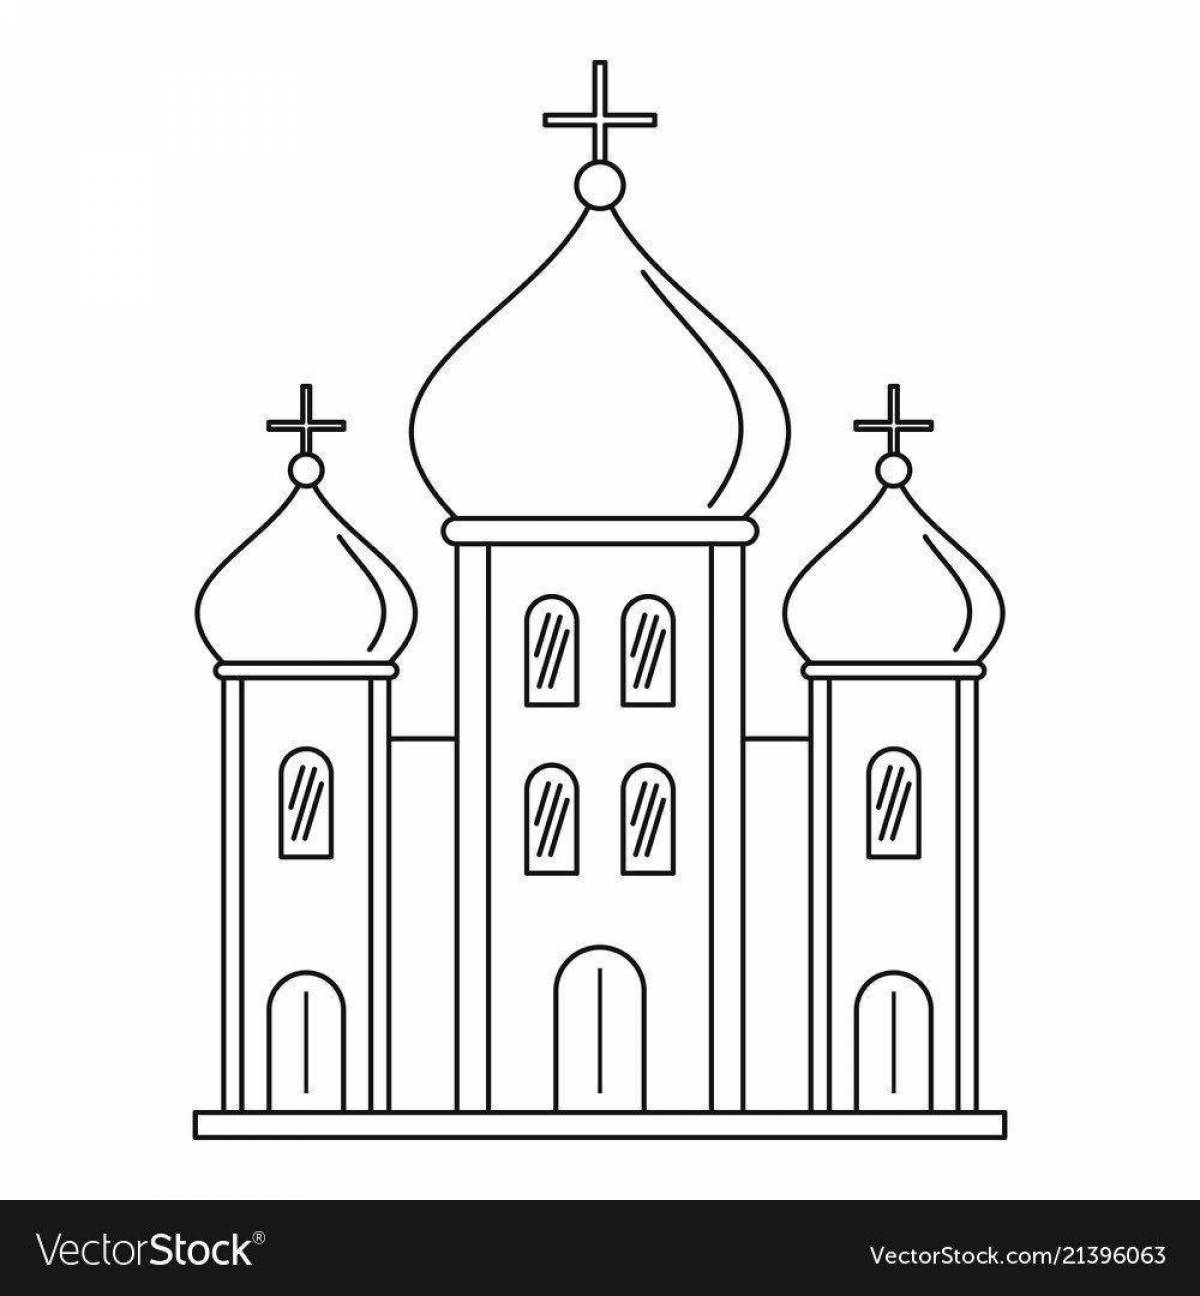 Раскраски Церковь | Coloring pages, Coloring pages for kids, Graphic design services